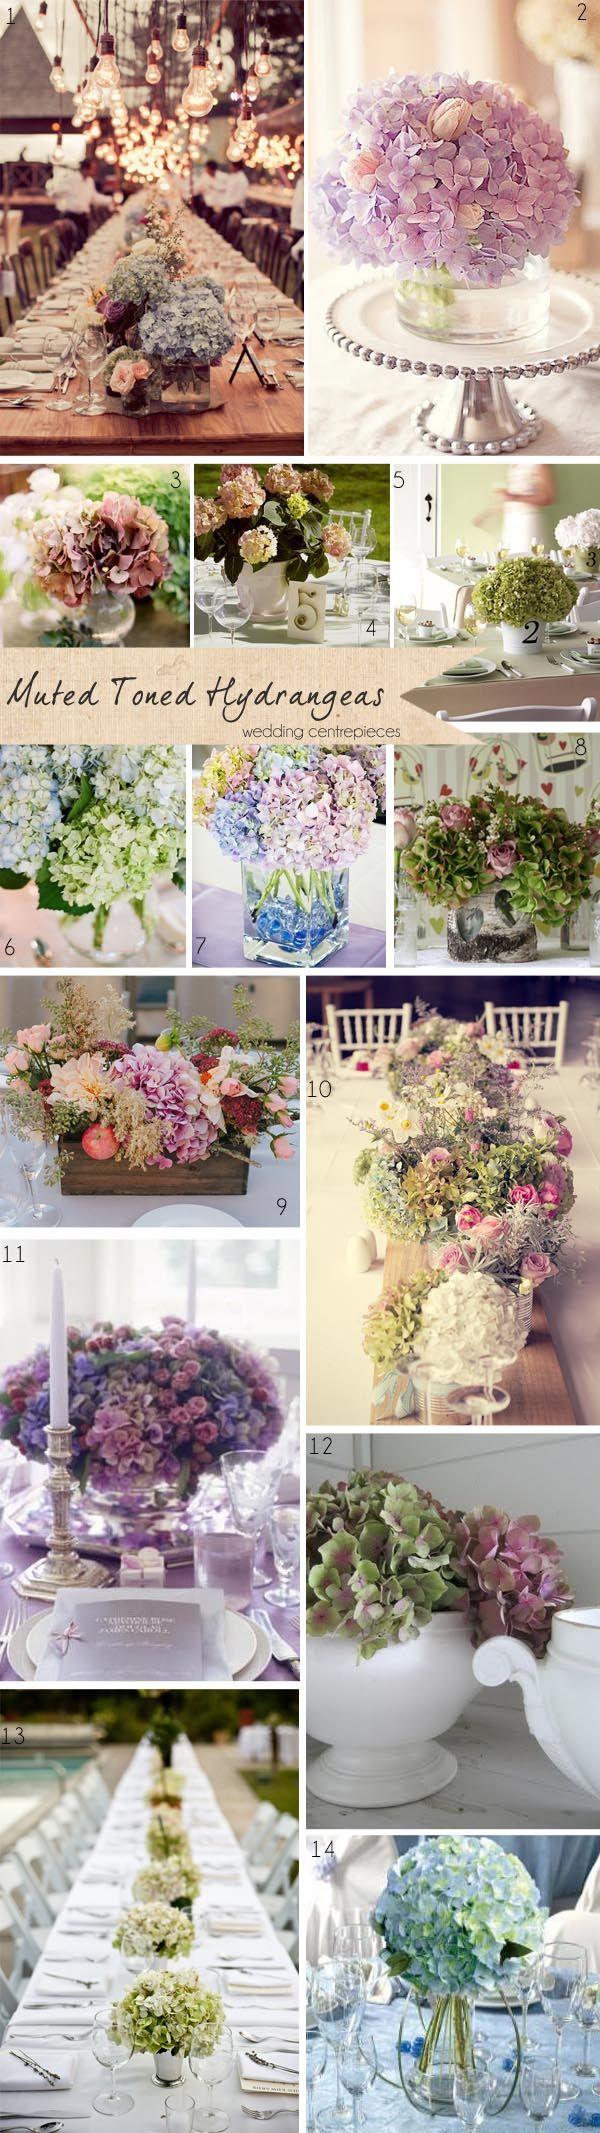 Wedding - Muted Toned Hydrangeas ~ Get To Know Your Wedding Flowers